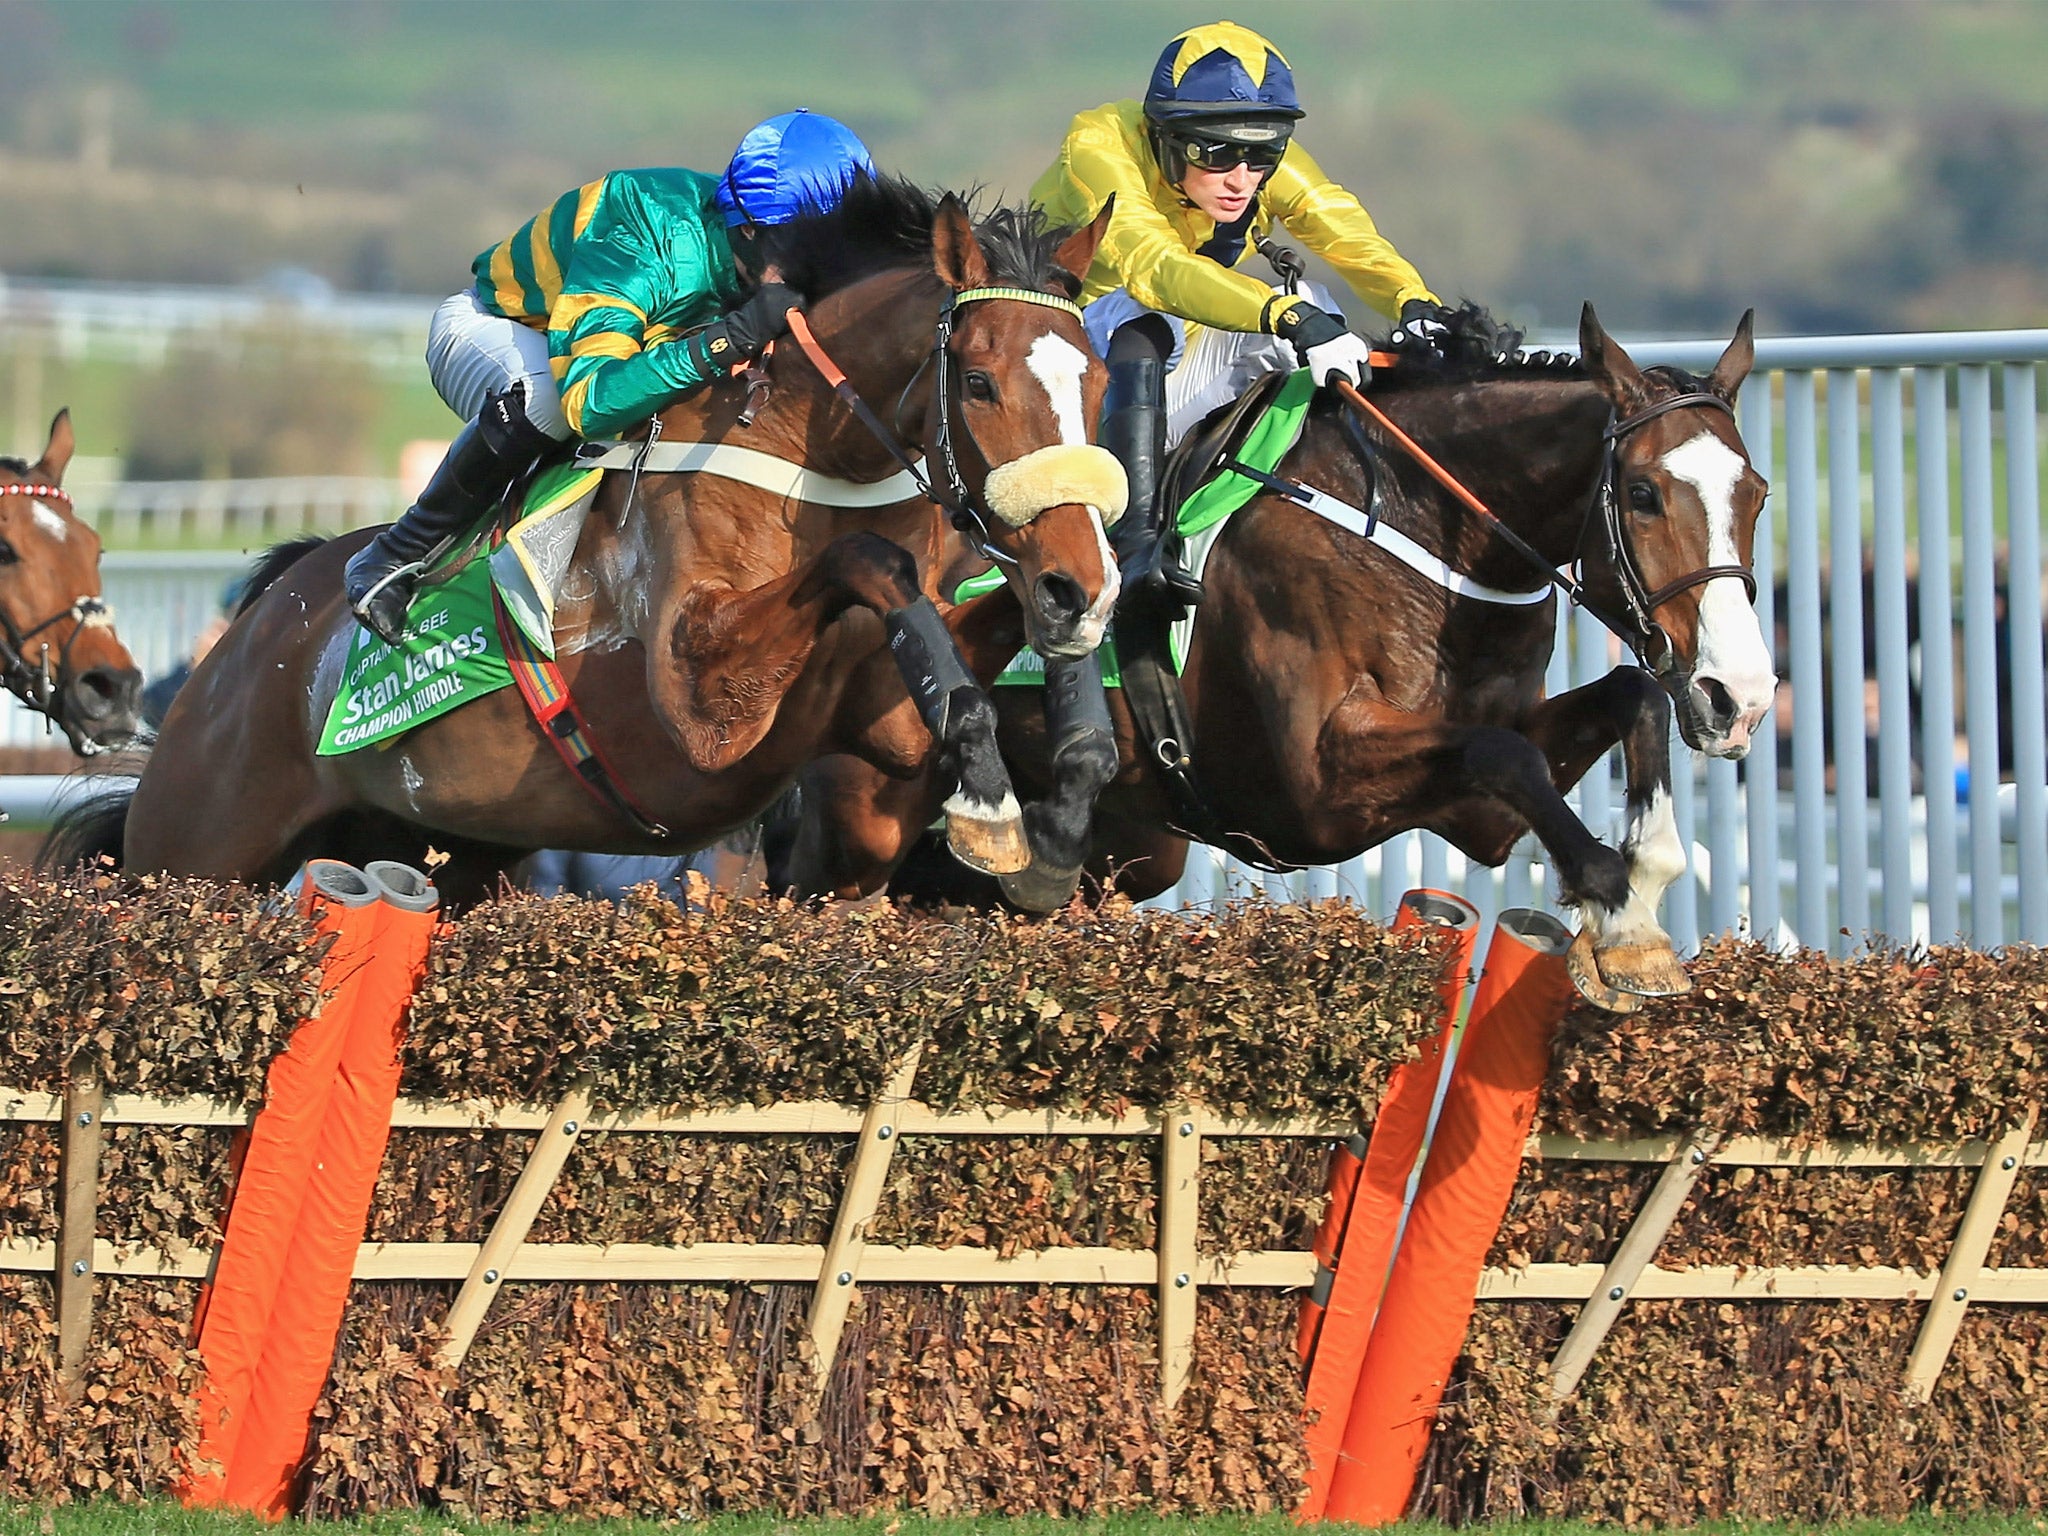 Daniel Mullins on Our Conor (right) briefly leads the field featuring eventual winner Jezki, ridden by Barry Geraghty (left)